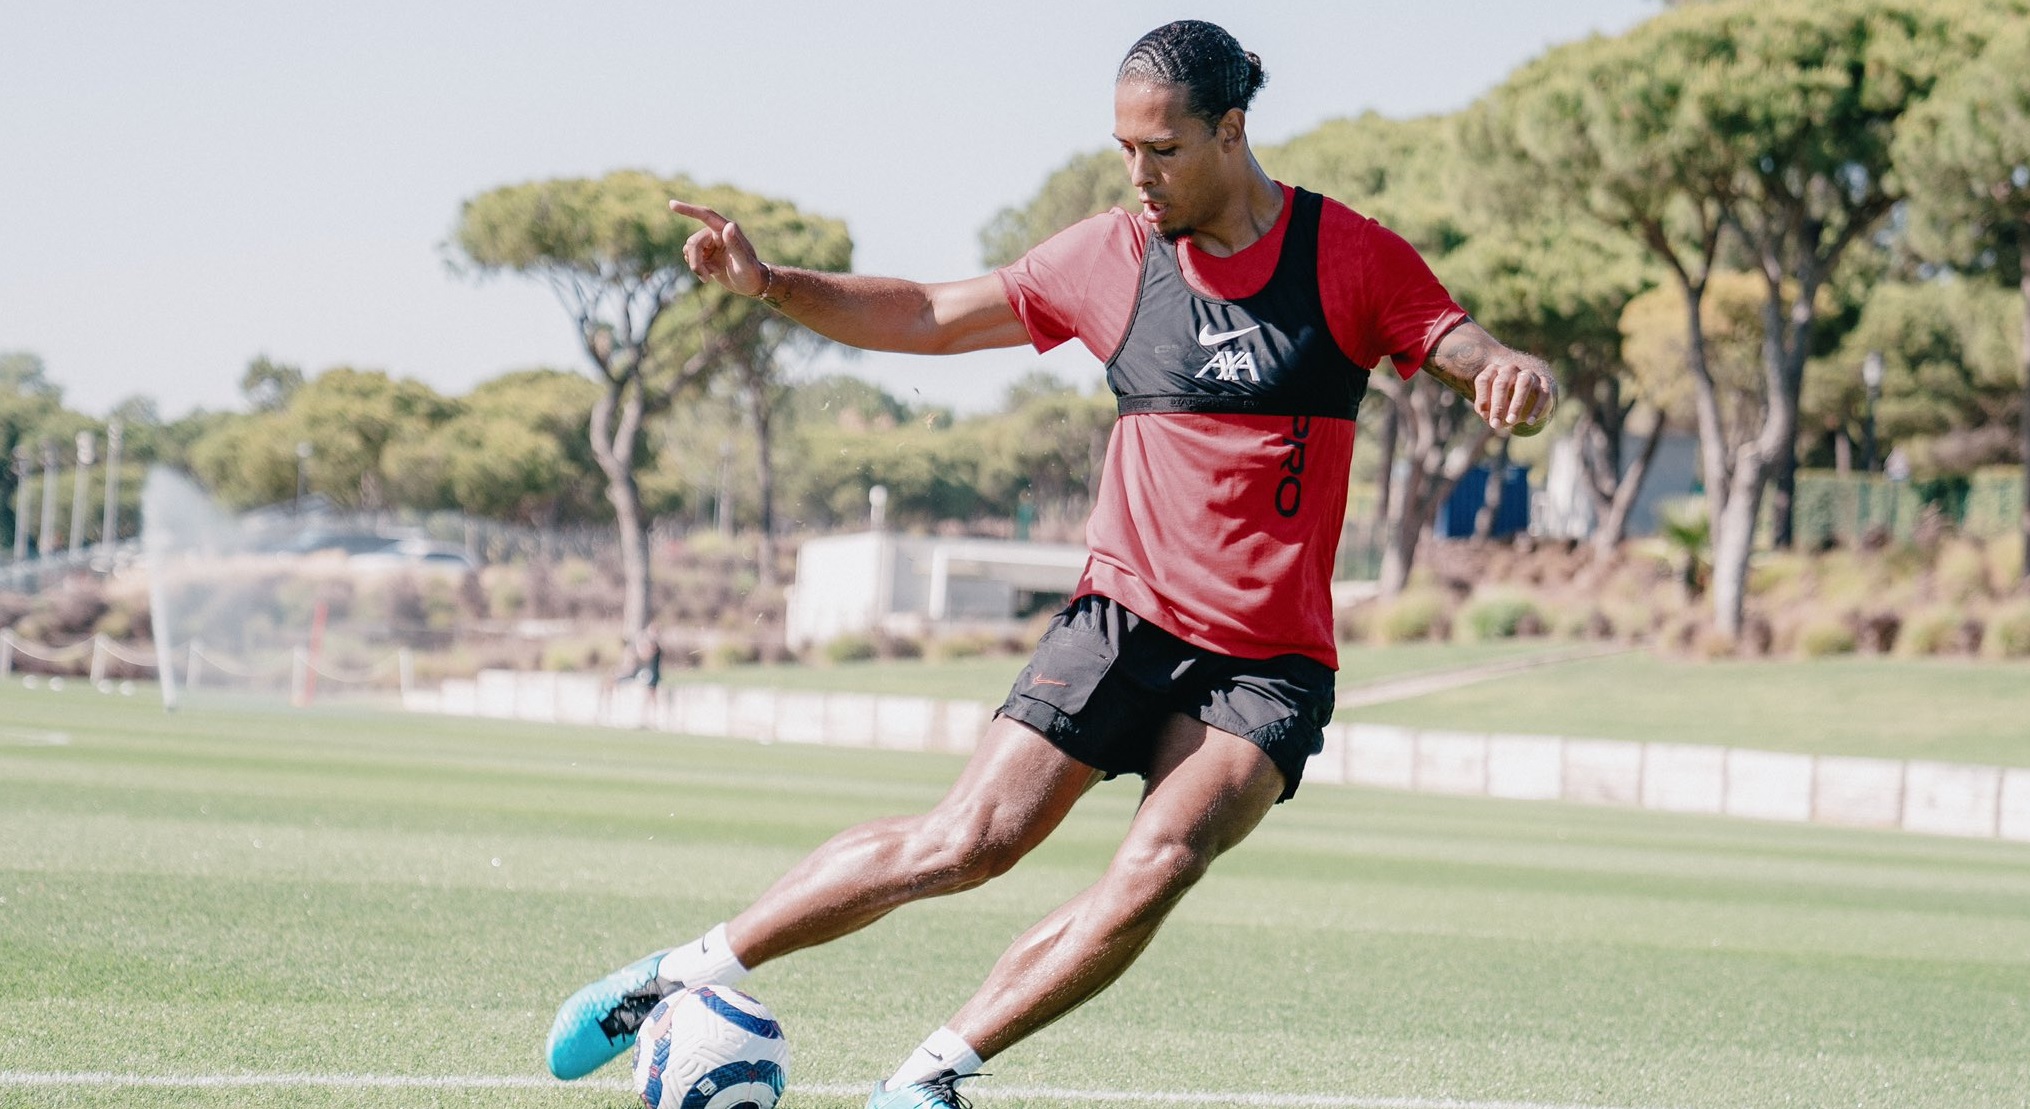 (Video) Van Dijk’s powerful shot in Instagram training clip will leave Liverpool fans in awe